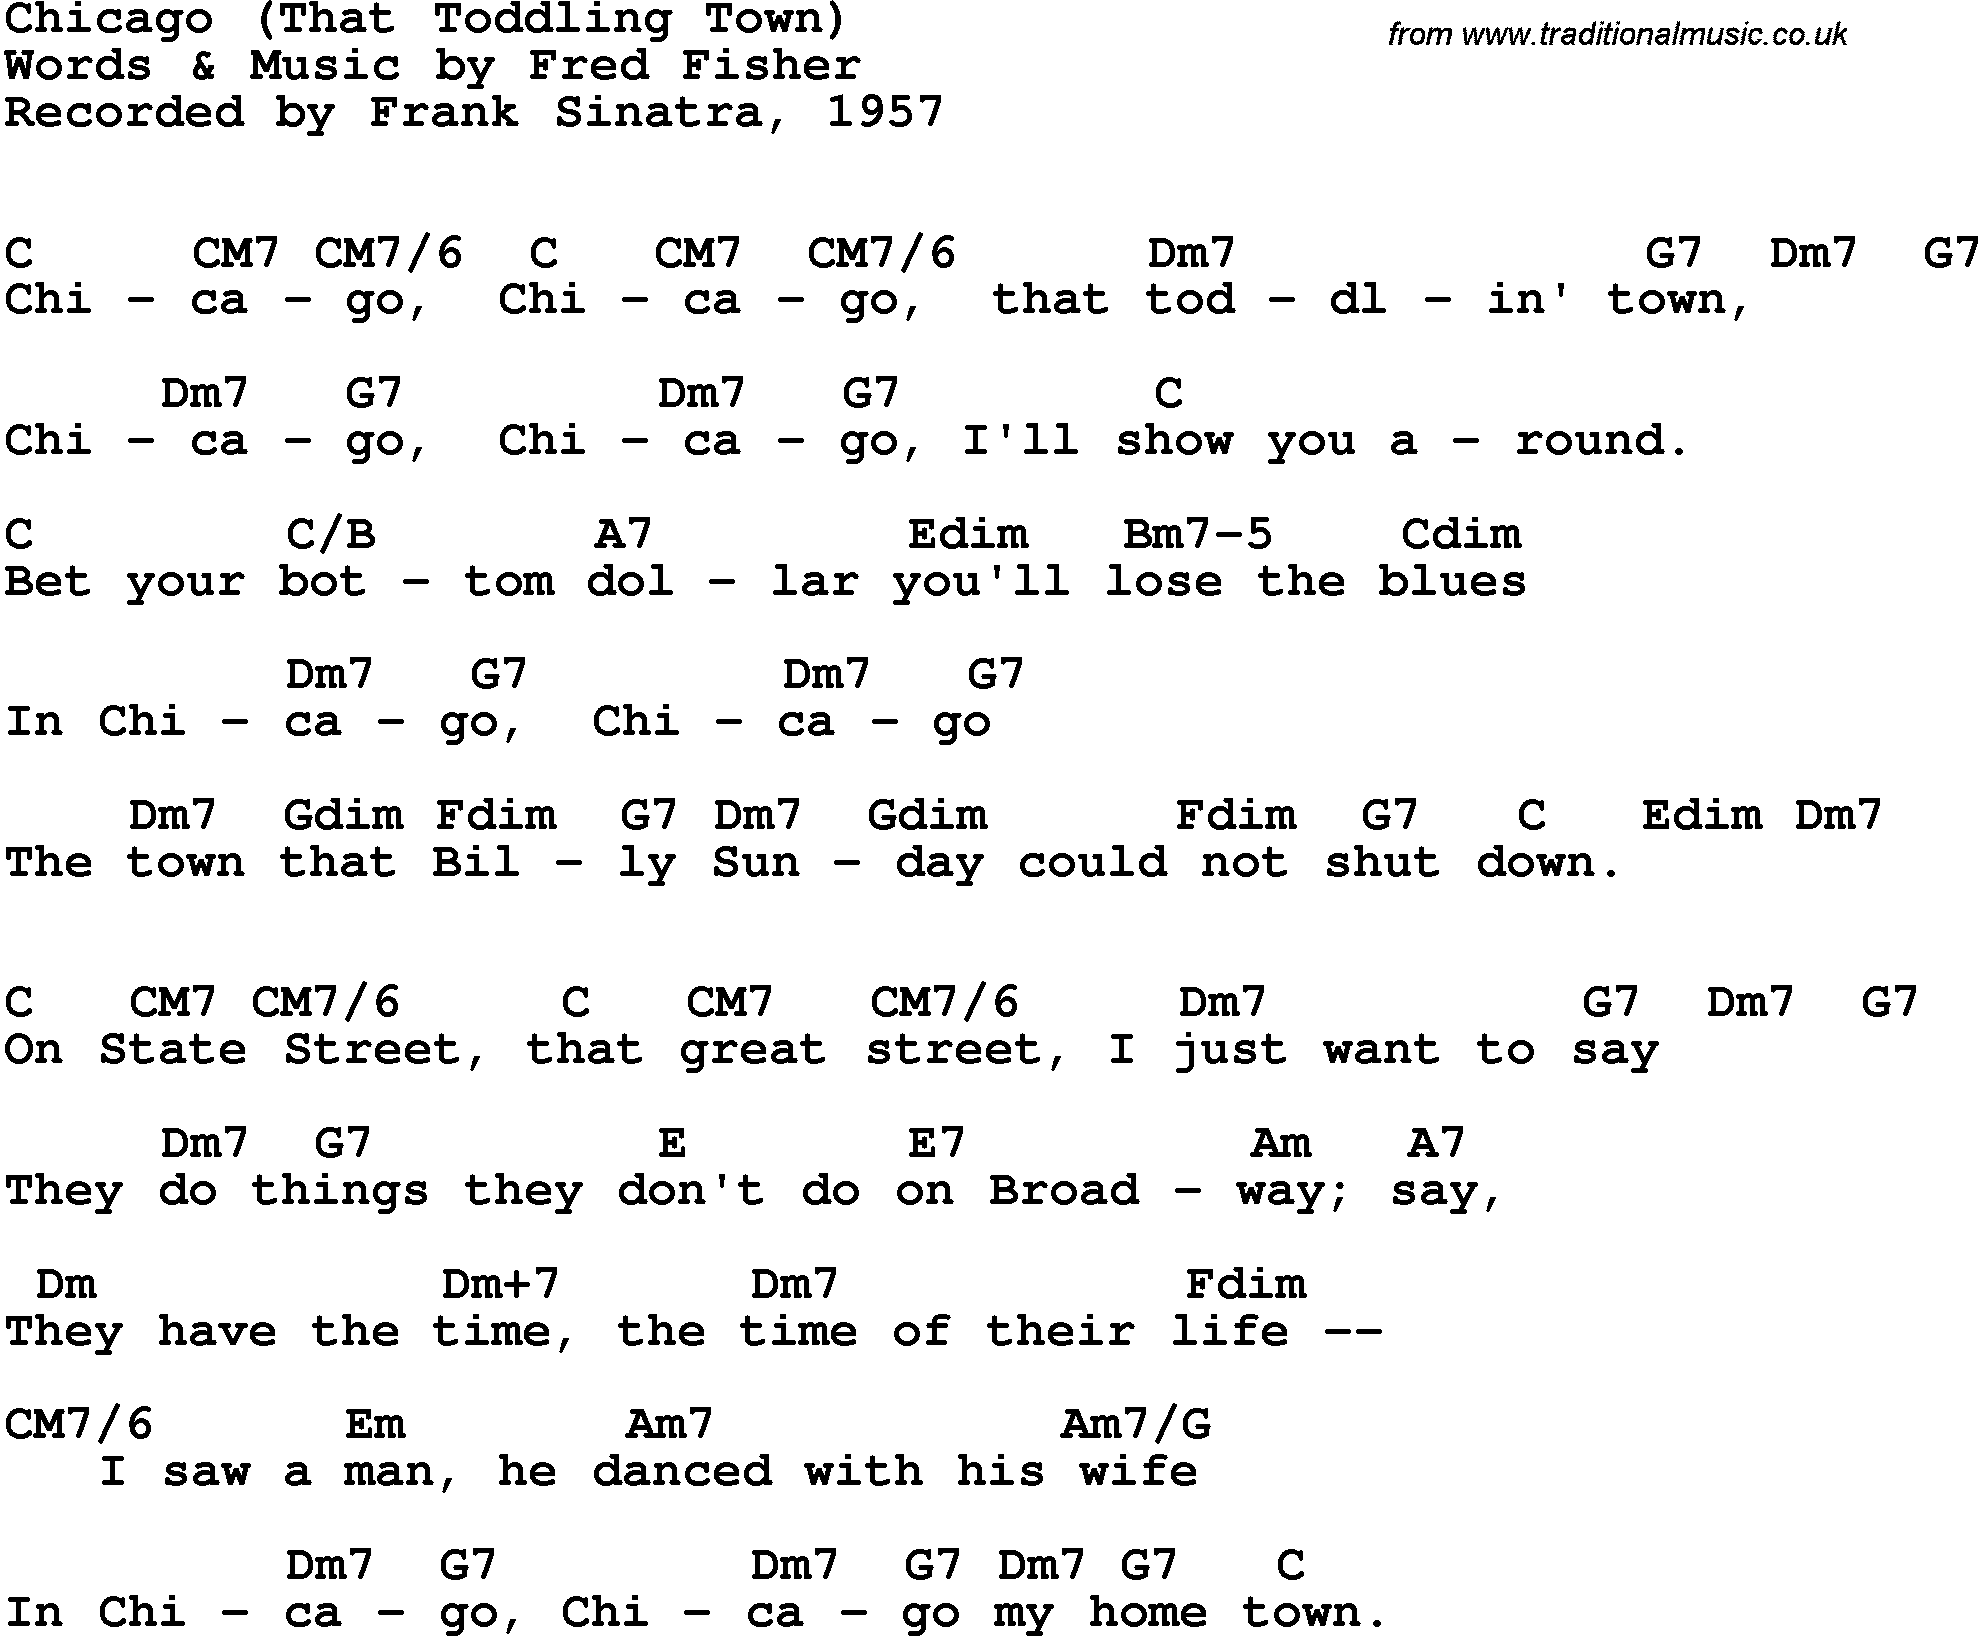 Song Lyrics with guitar chords for Chicago - Frank Sinatra, 1957